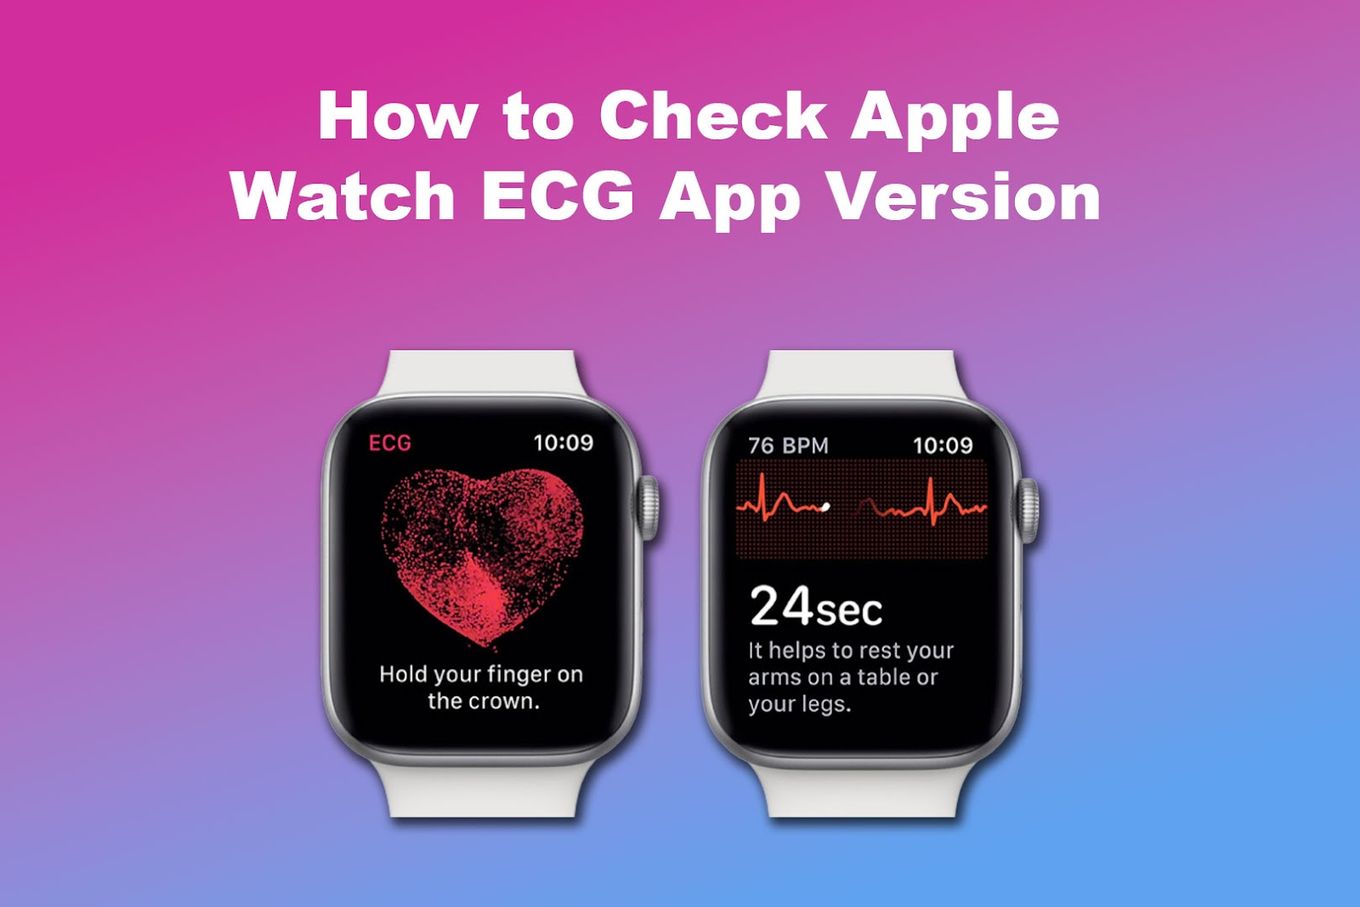 How to Check Apple Watch ECG App Version